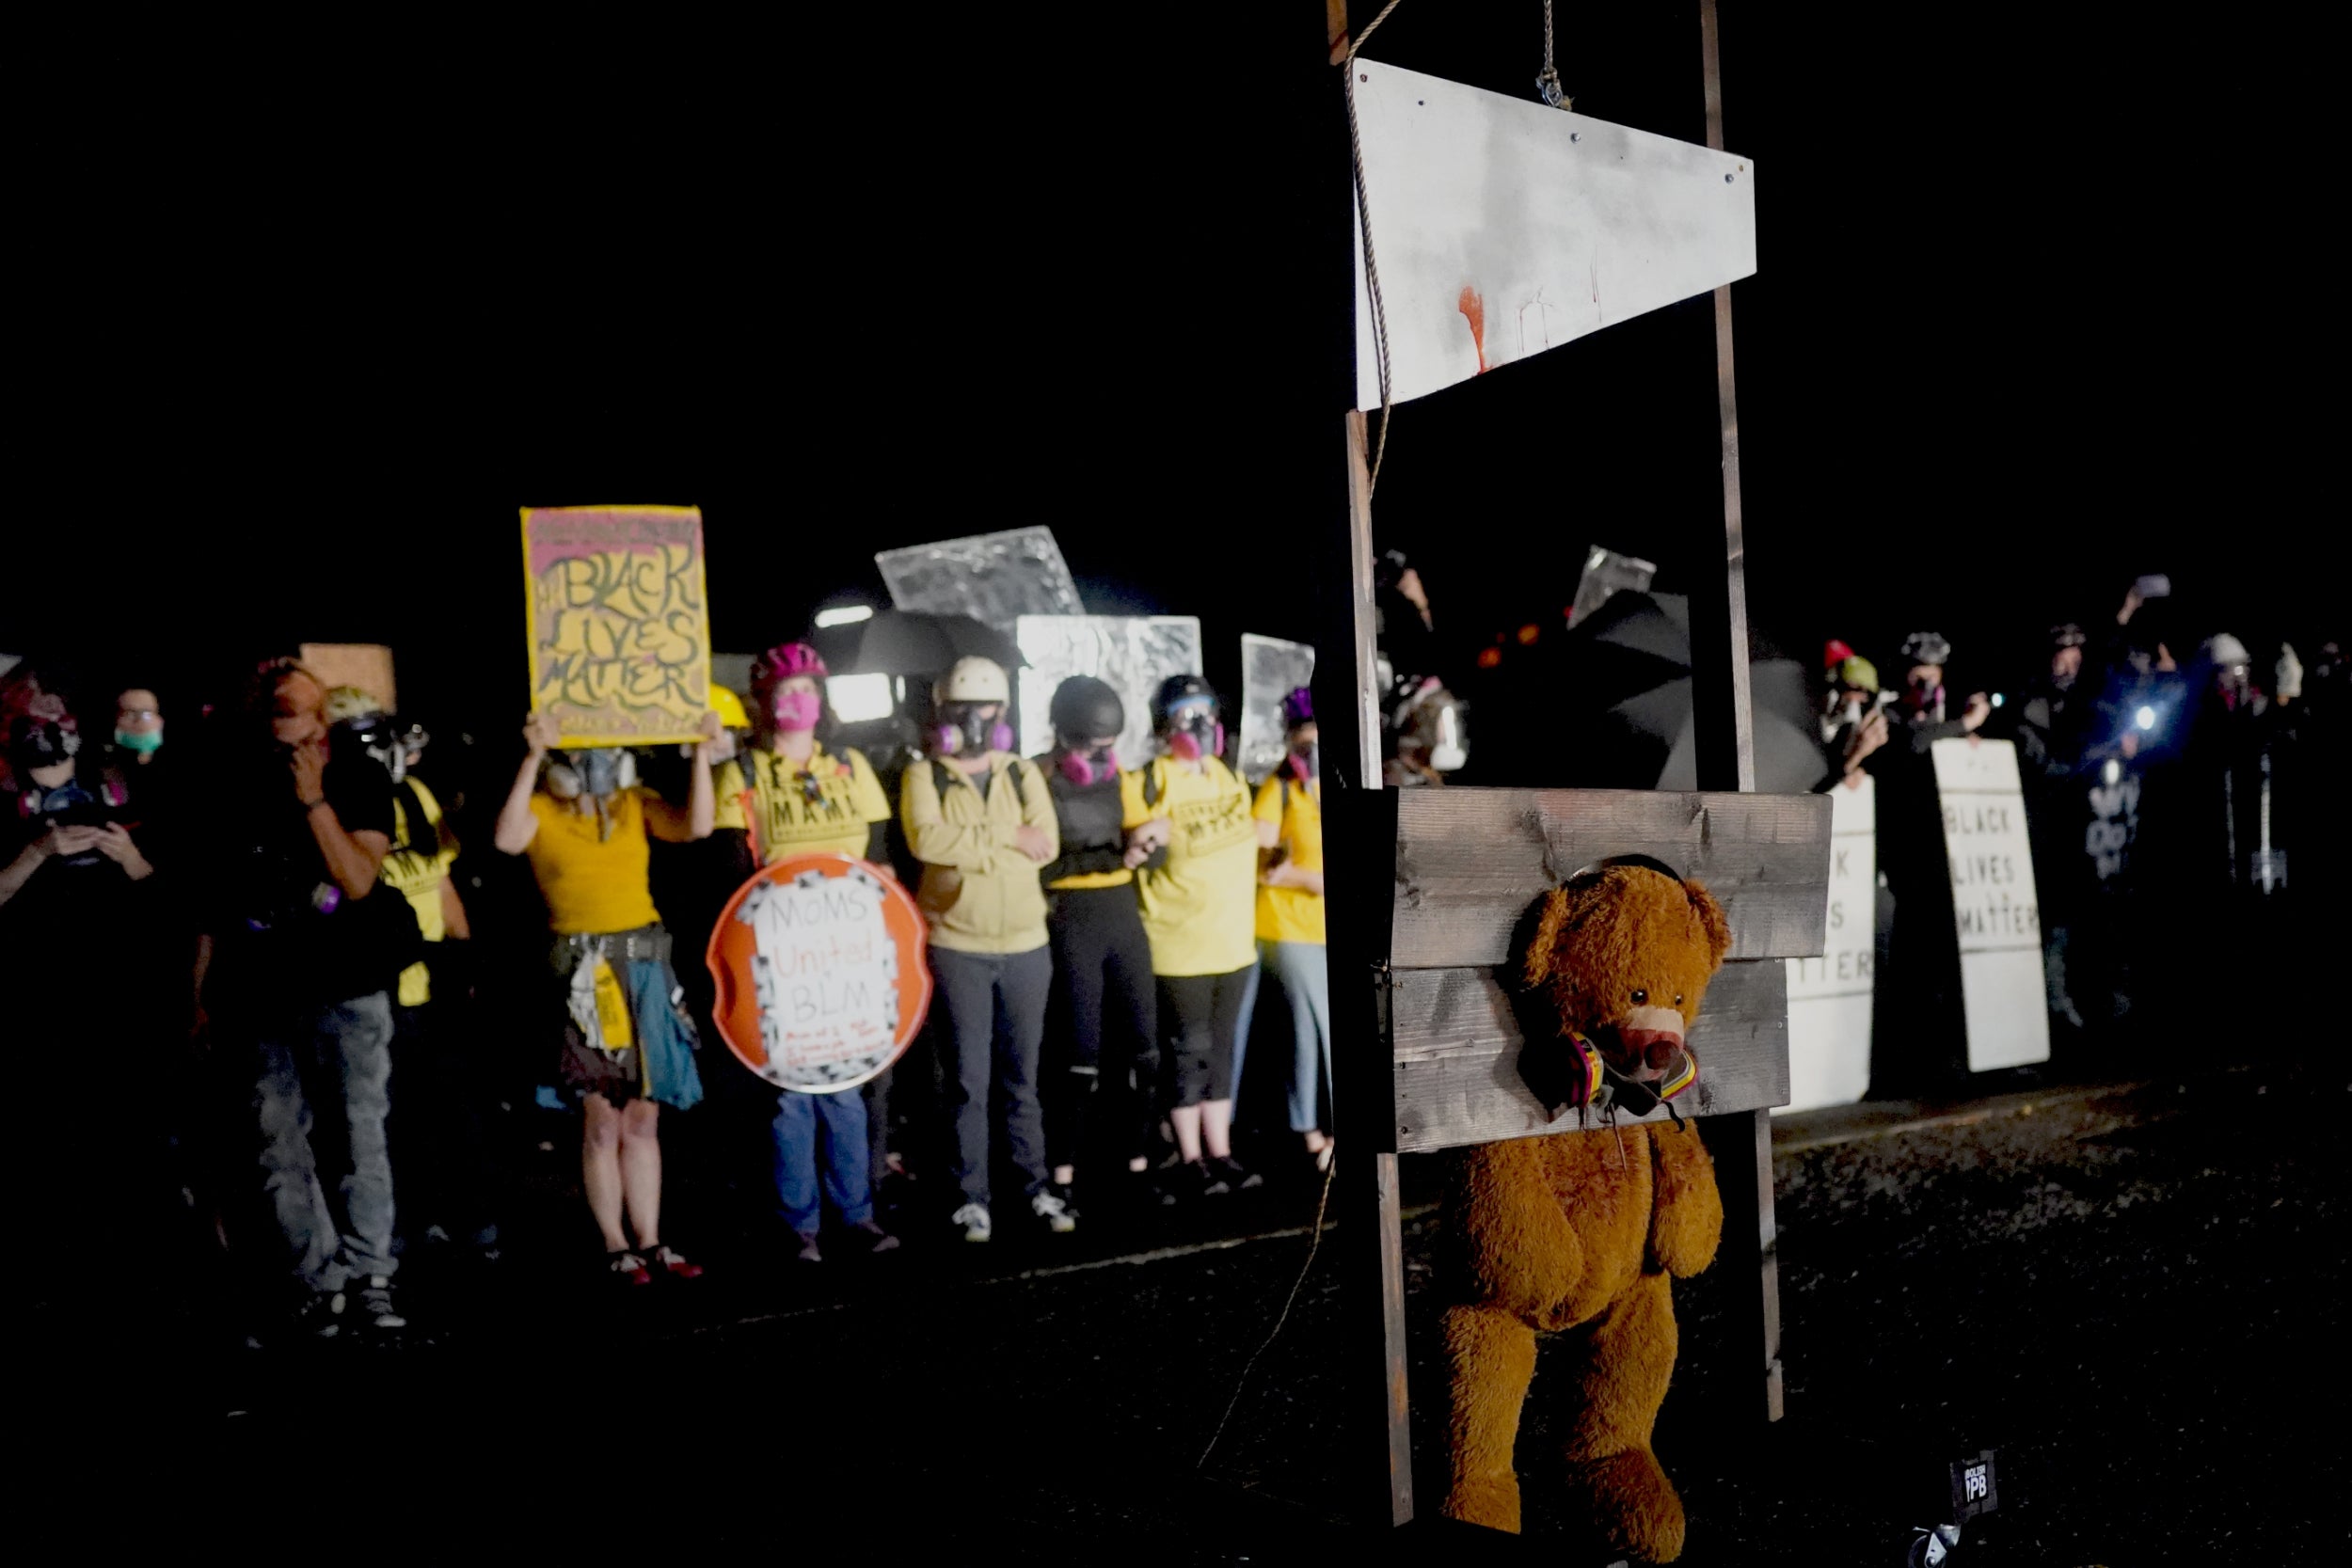 Portland Protesters Burn Maga Hats And Guillotine Giant Teddy Bear On Eve Of Trump Convention The Independent The Independent